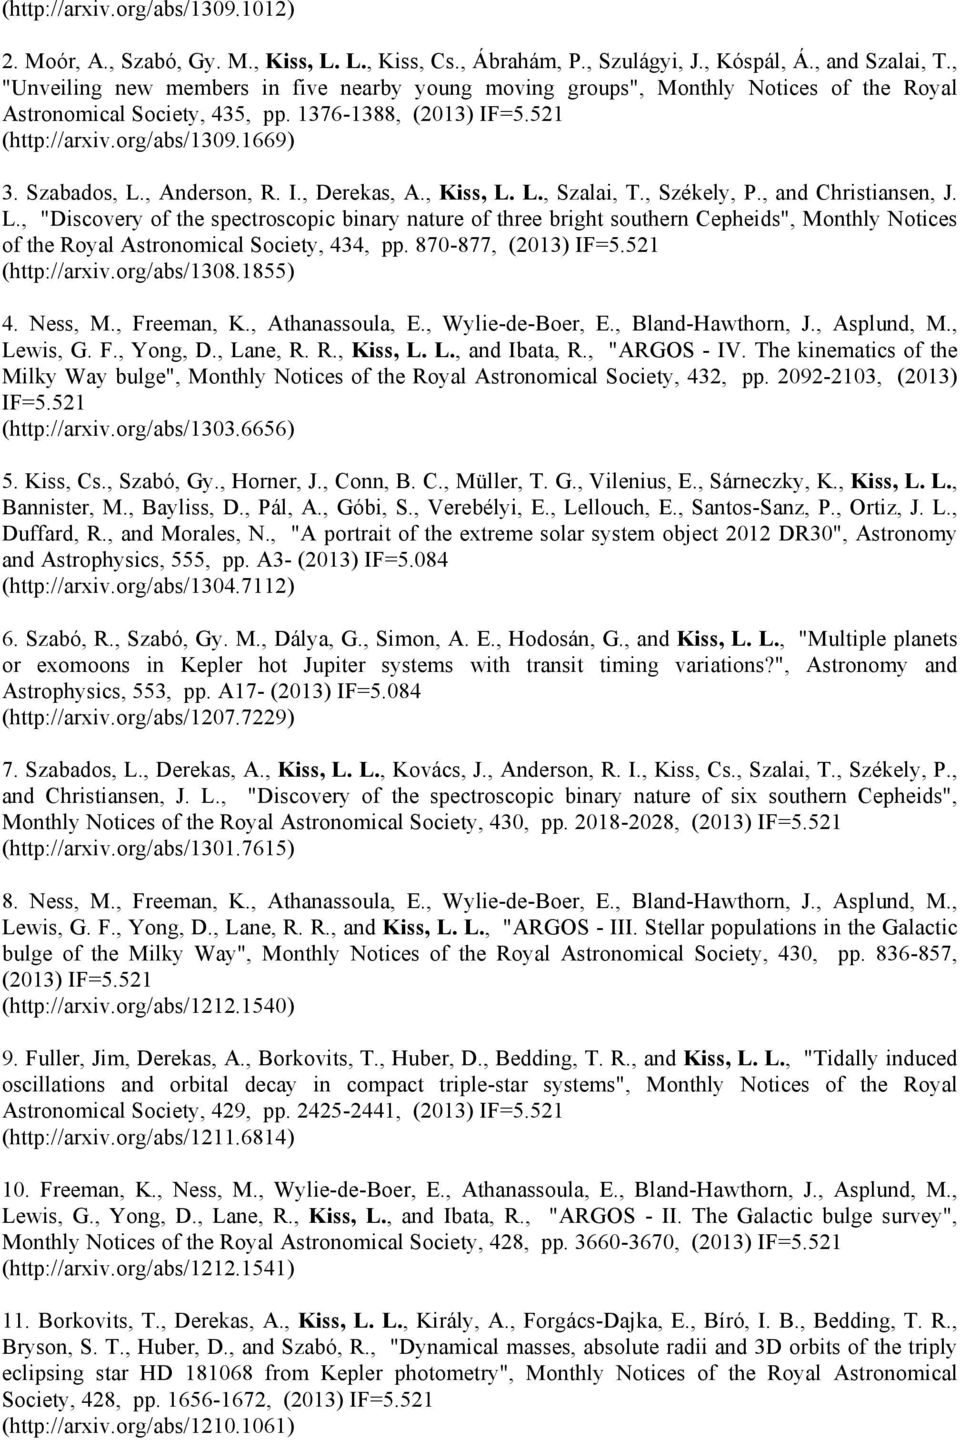 , Anderson, R. I., Derekas, A., Kiss, L. L., Szalai, T., Székely, P., and Christiansen, J. L., "Discovery of the spectroscopic binary nature of three bright southern Cepheids", Monthly Notices of the Royal Astronomical Society, 434, pp.